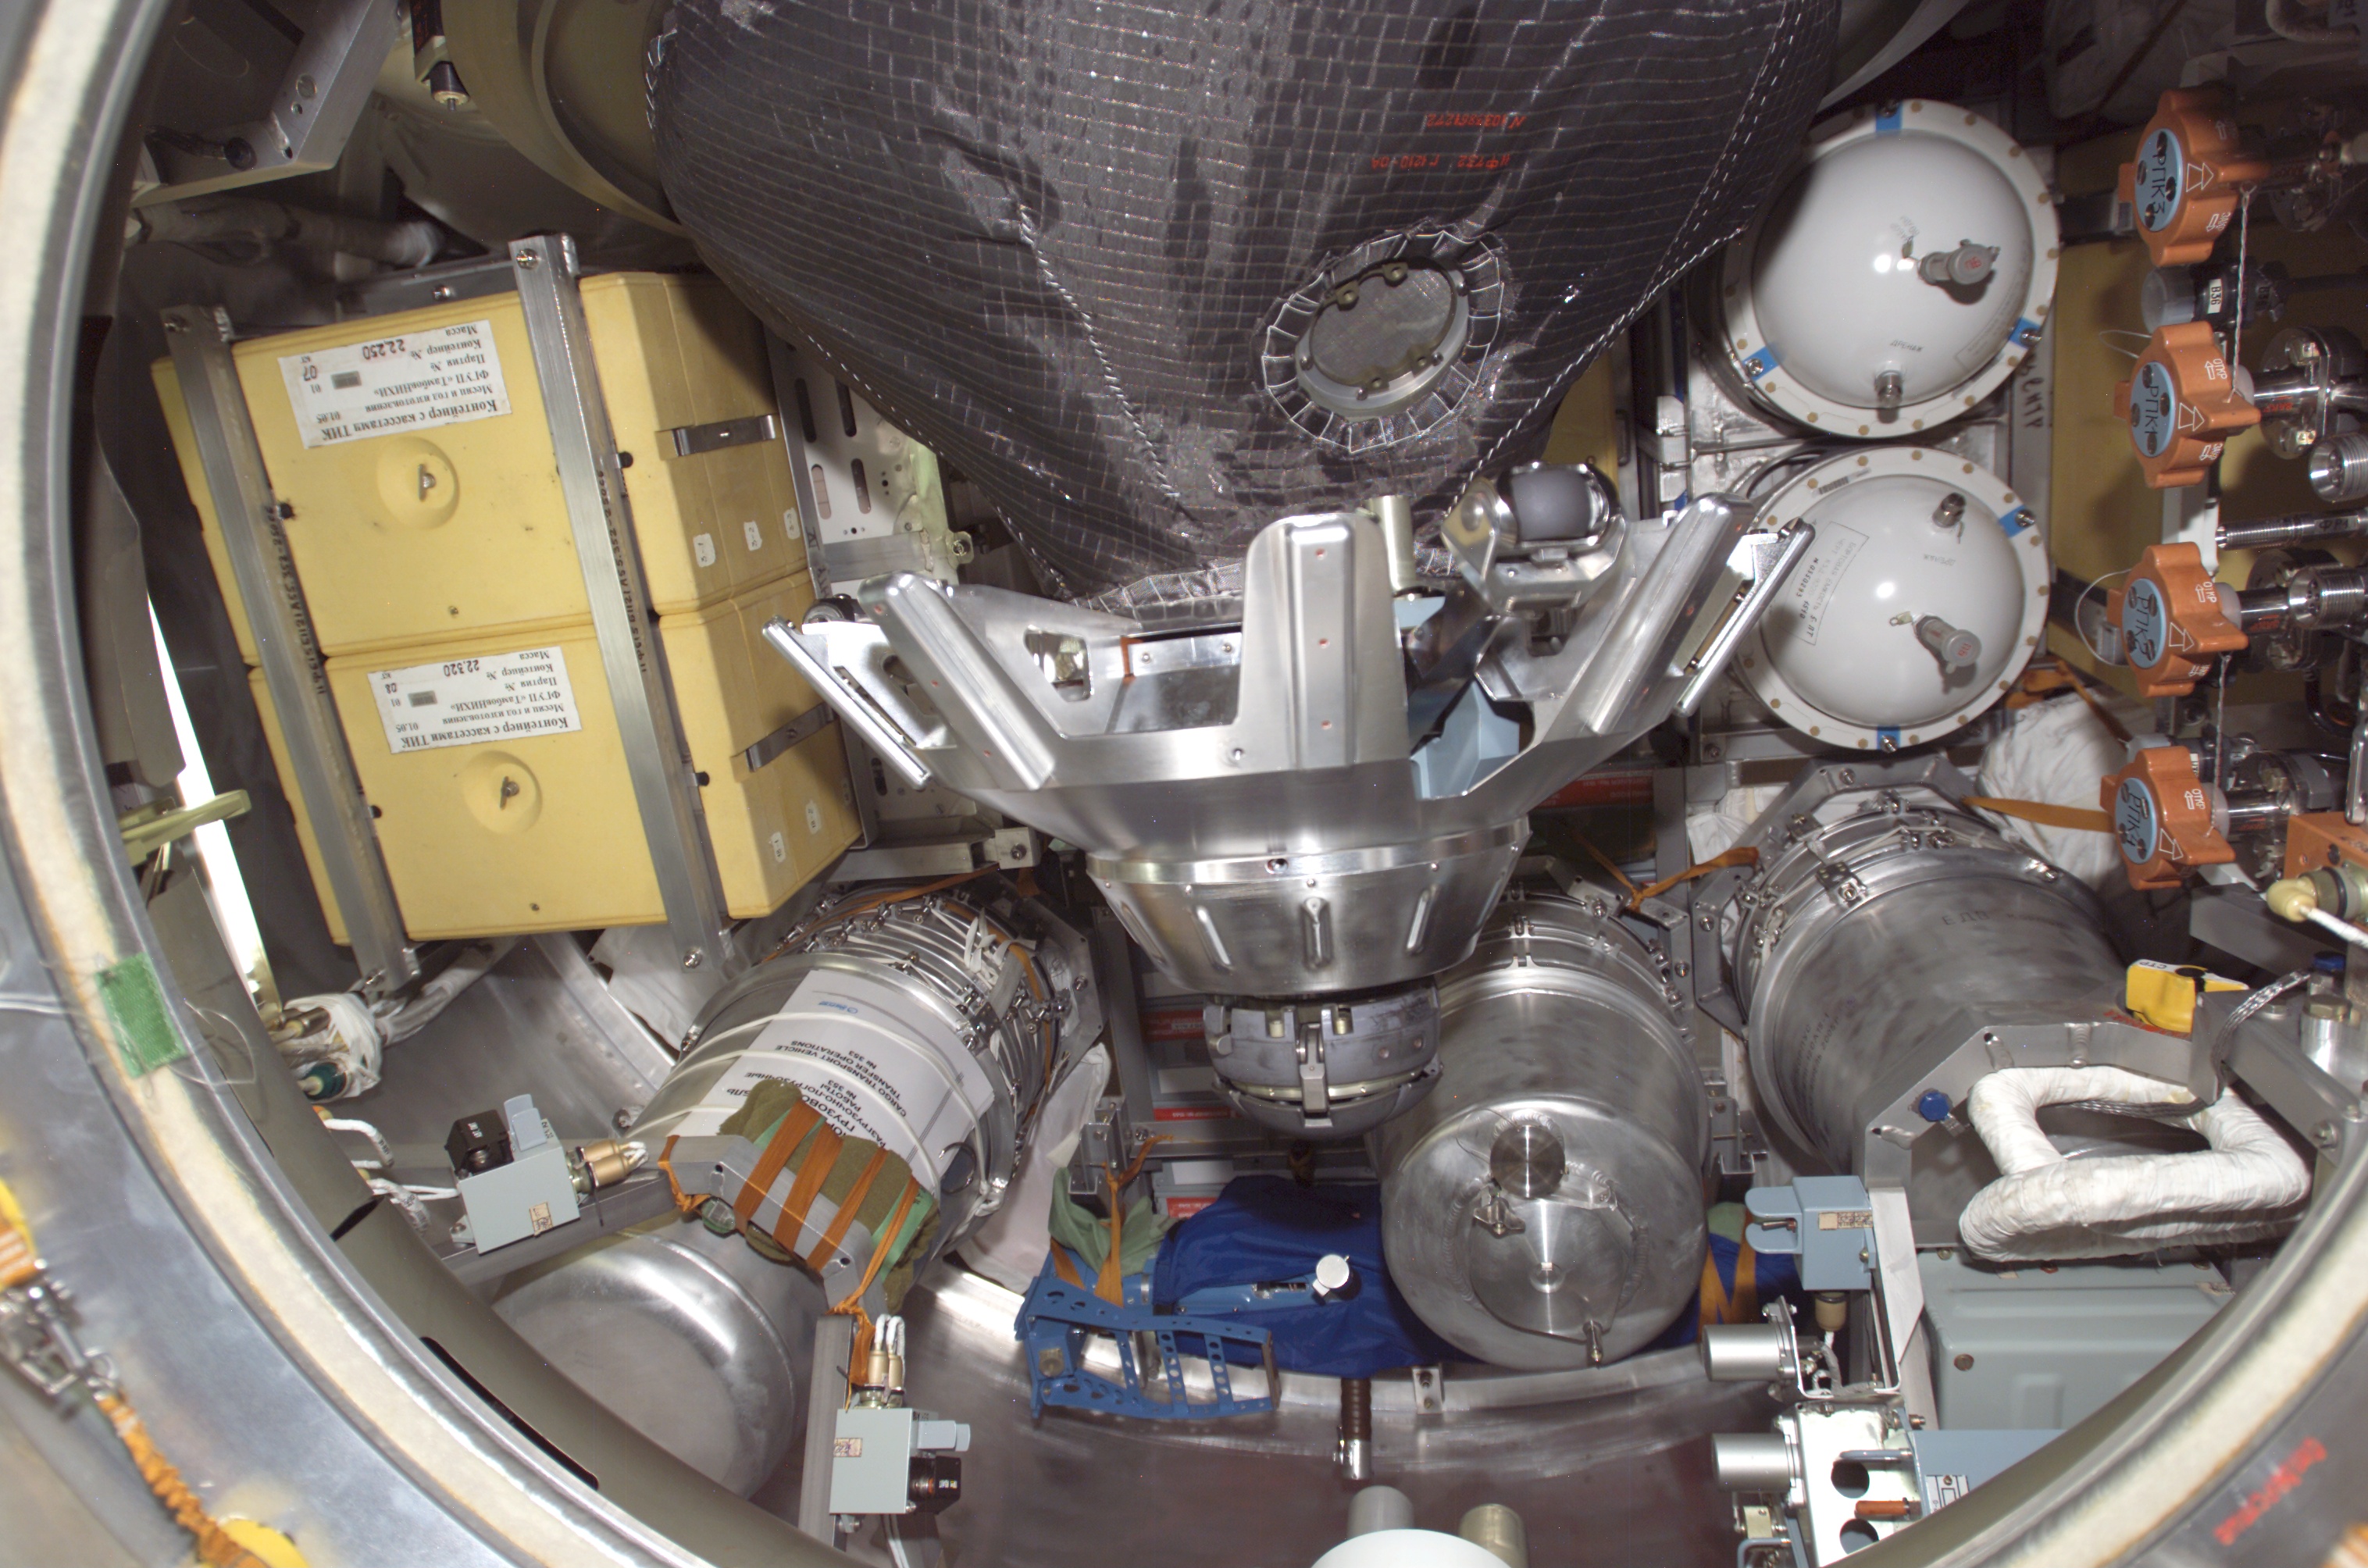 ISS-11 The hatch of the Progress 18 resupply craft